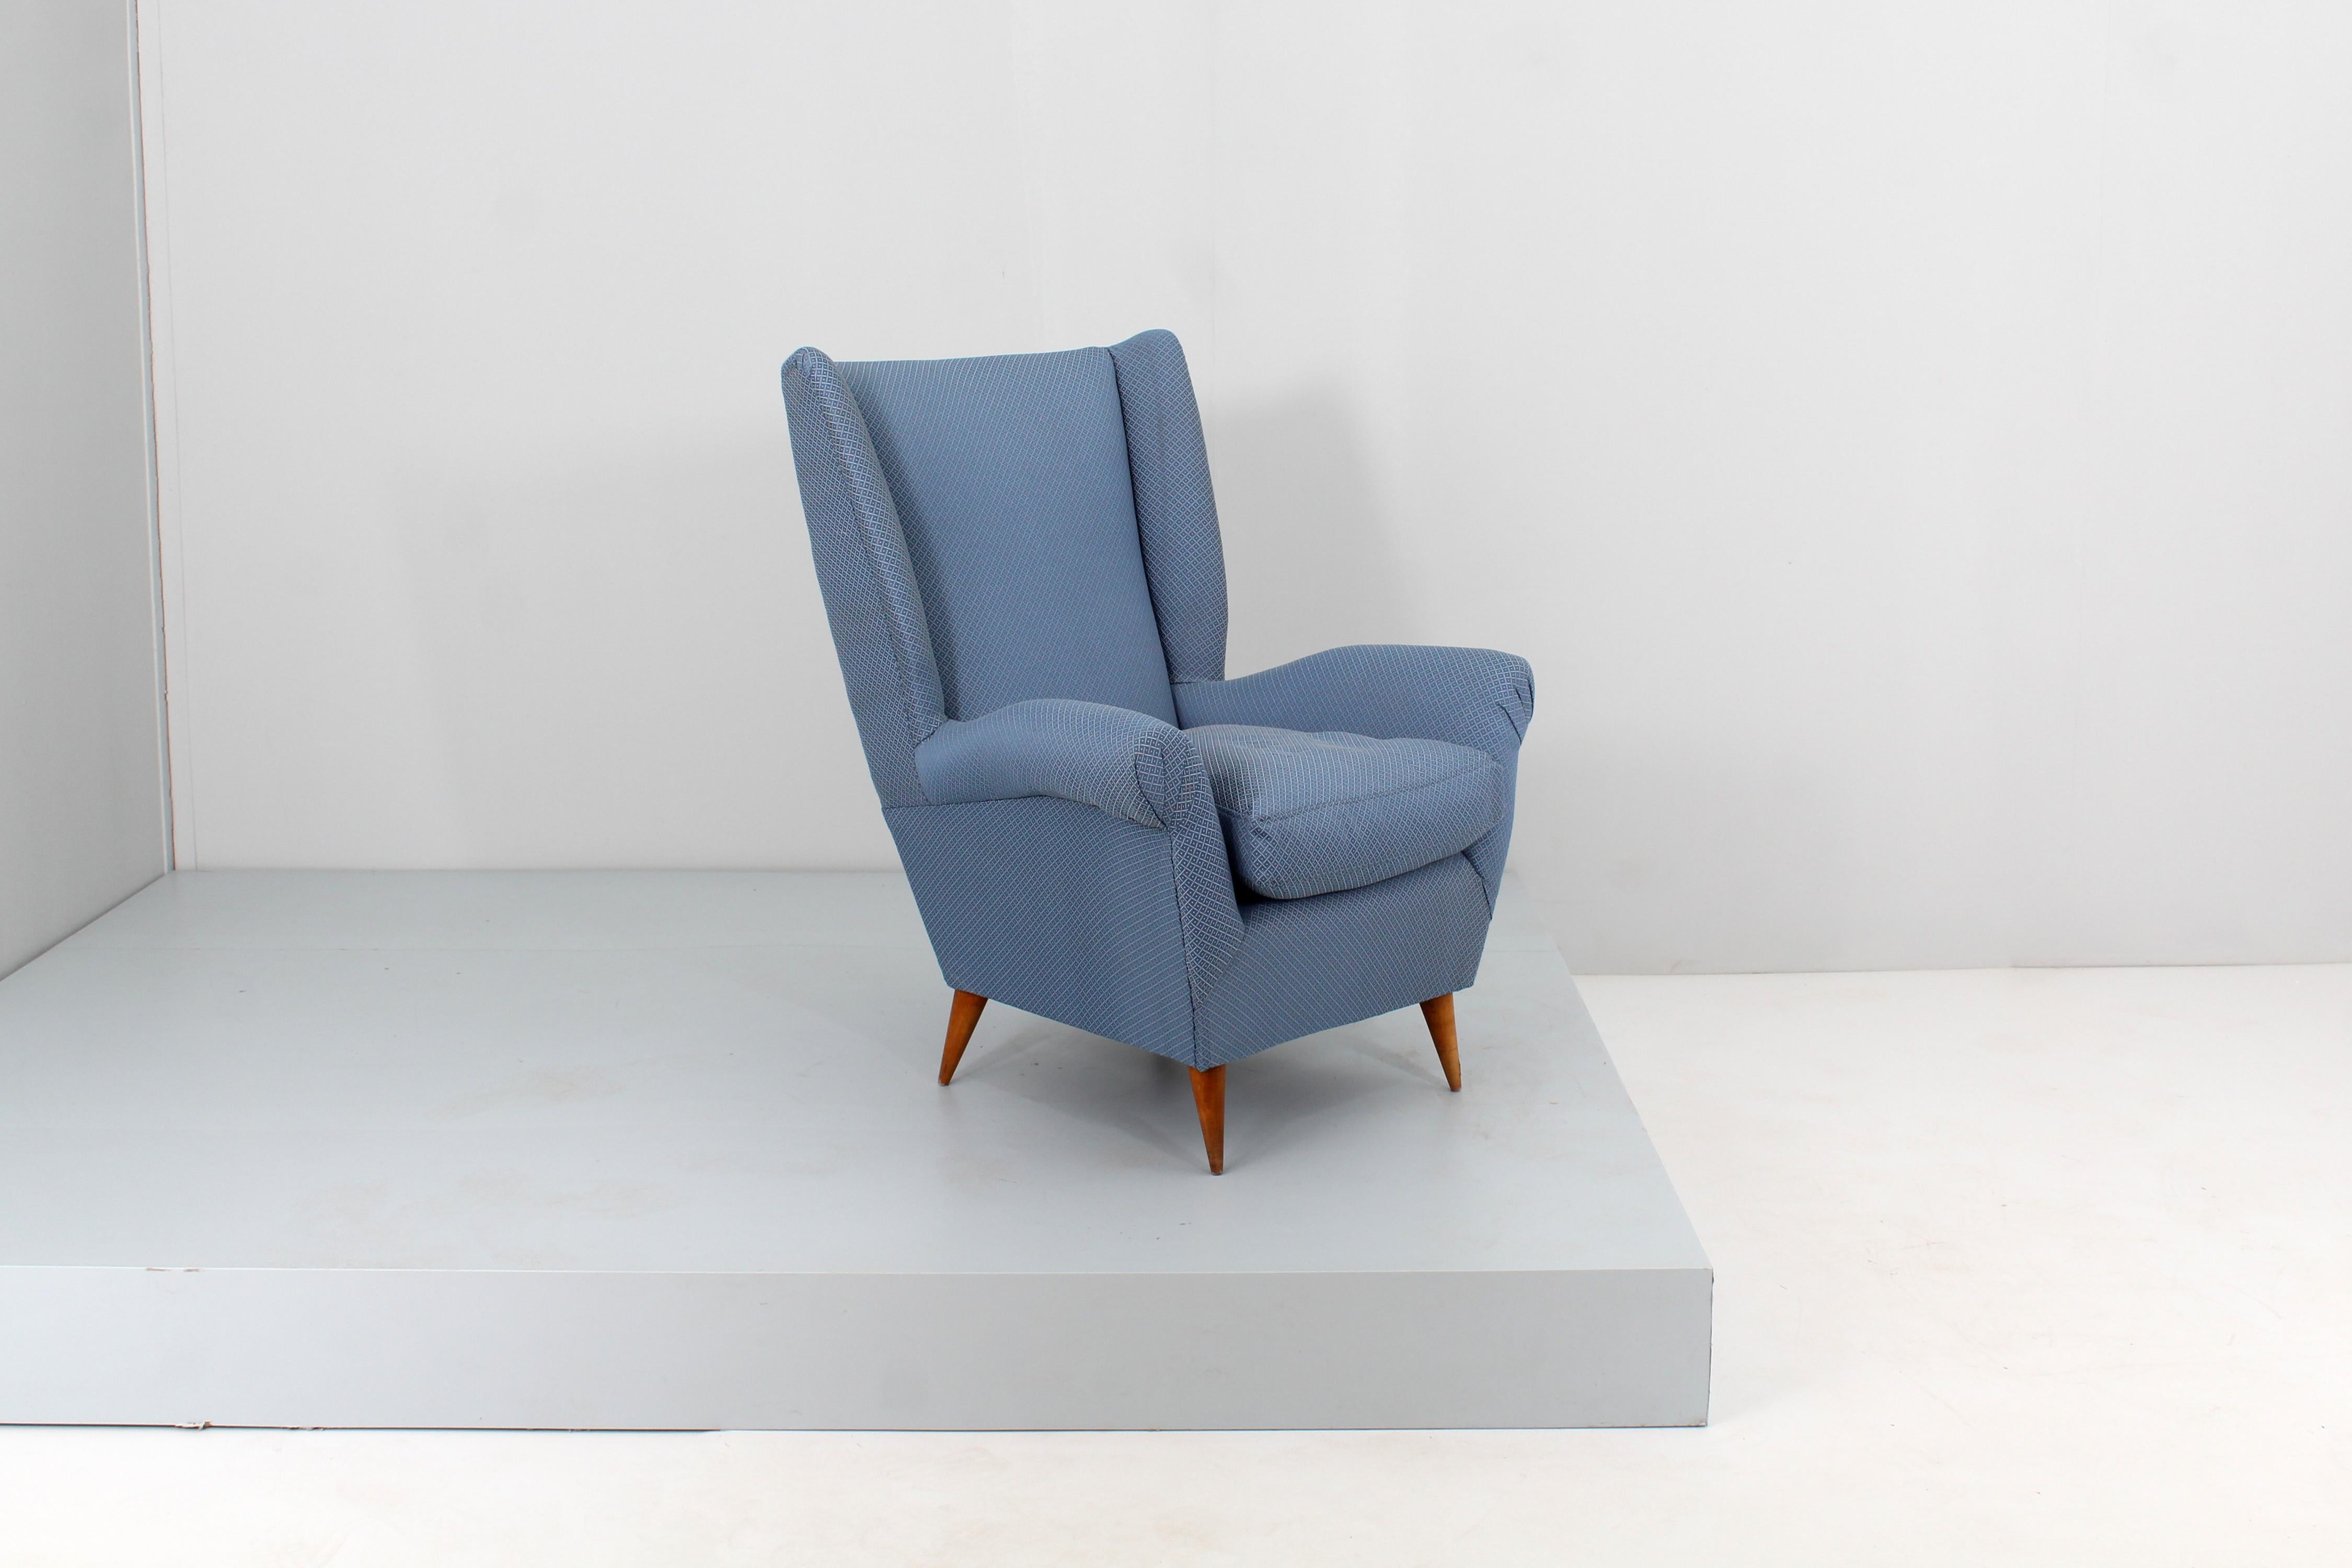 Very stylish armchair with wooden structure, upholstered in blue fabric with white lattice pattern, and conical wooden feet. Italian production by ISA Bergamo, from the 1950s, attributable to Giò Ponti.
Wear consistent with age and use.